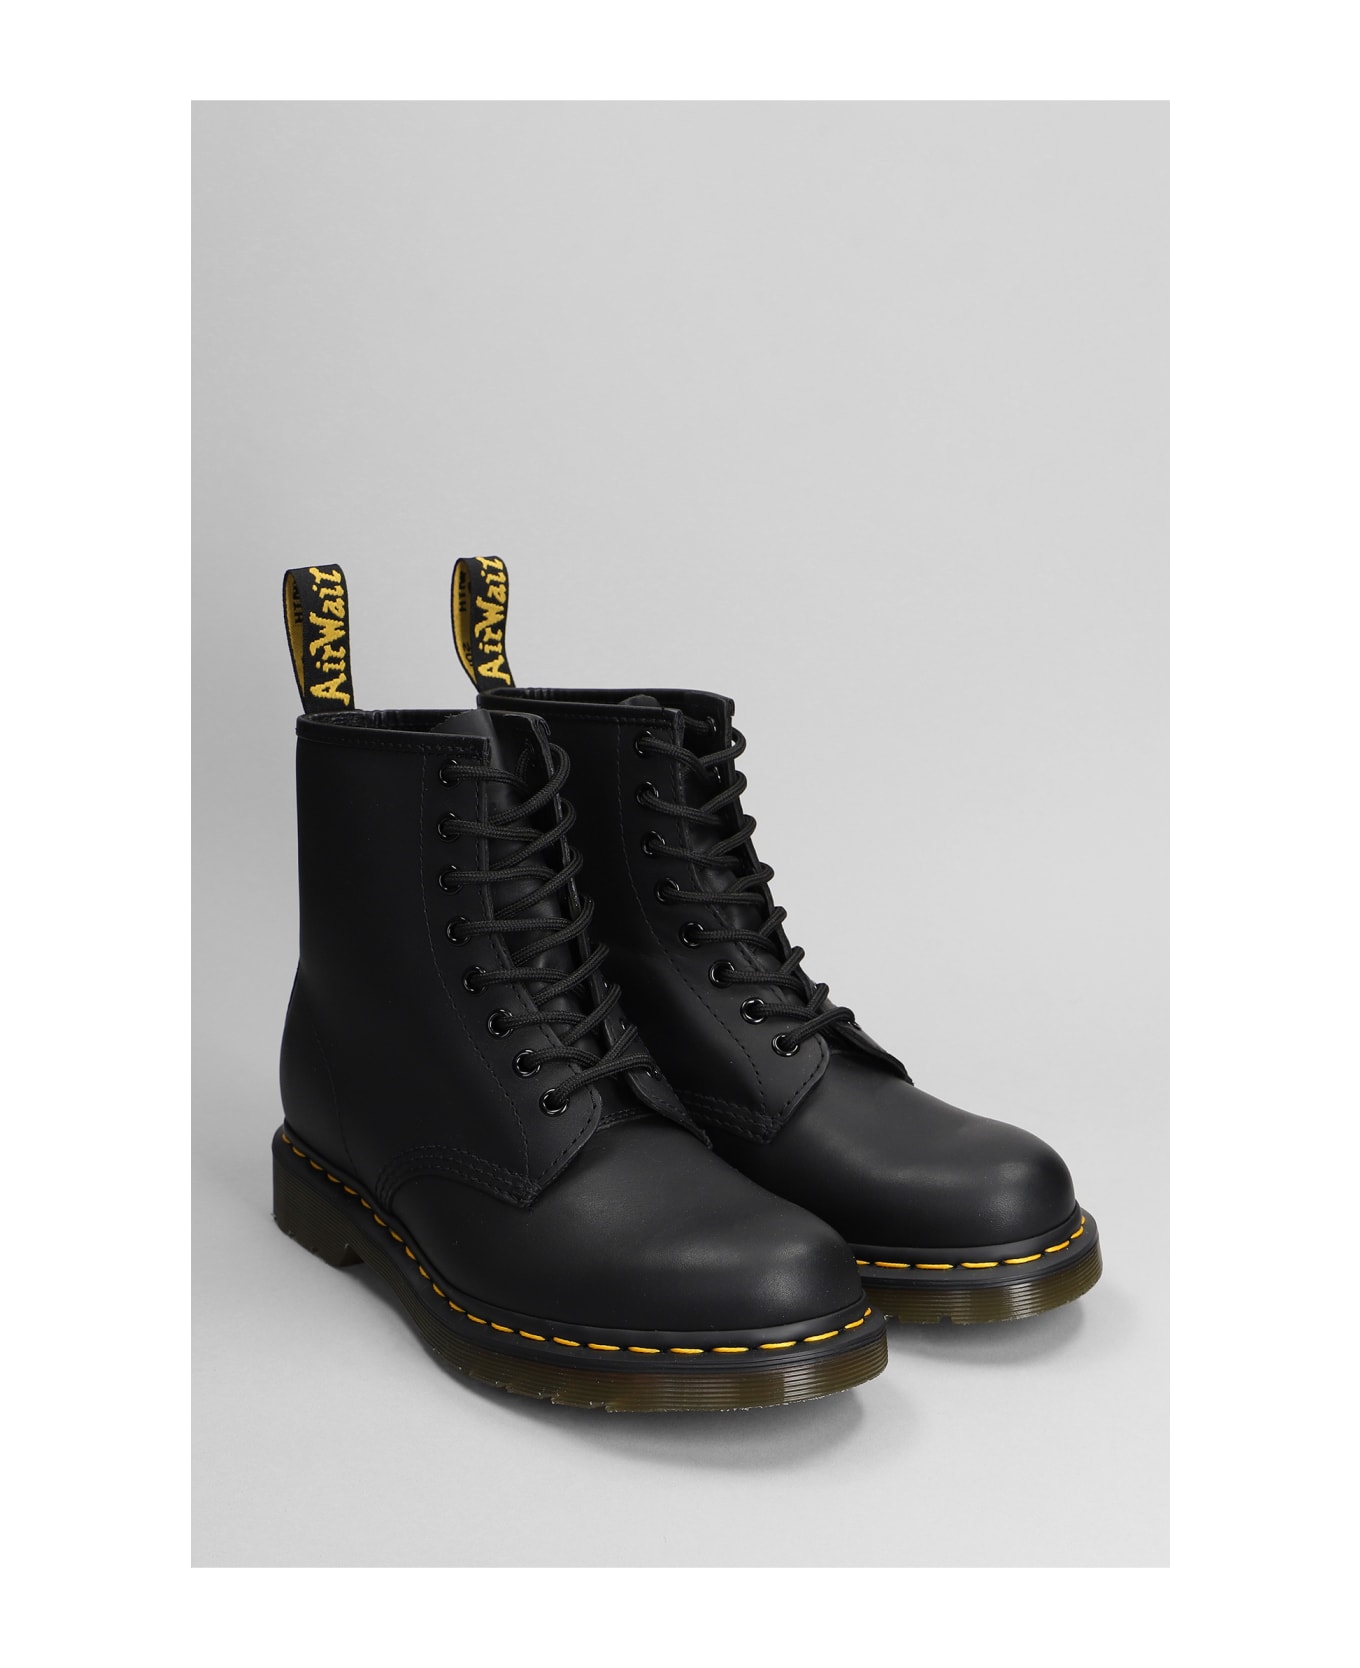 Dr. Martens 1460 Greasy Combat Boots In Black Leather - black